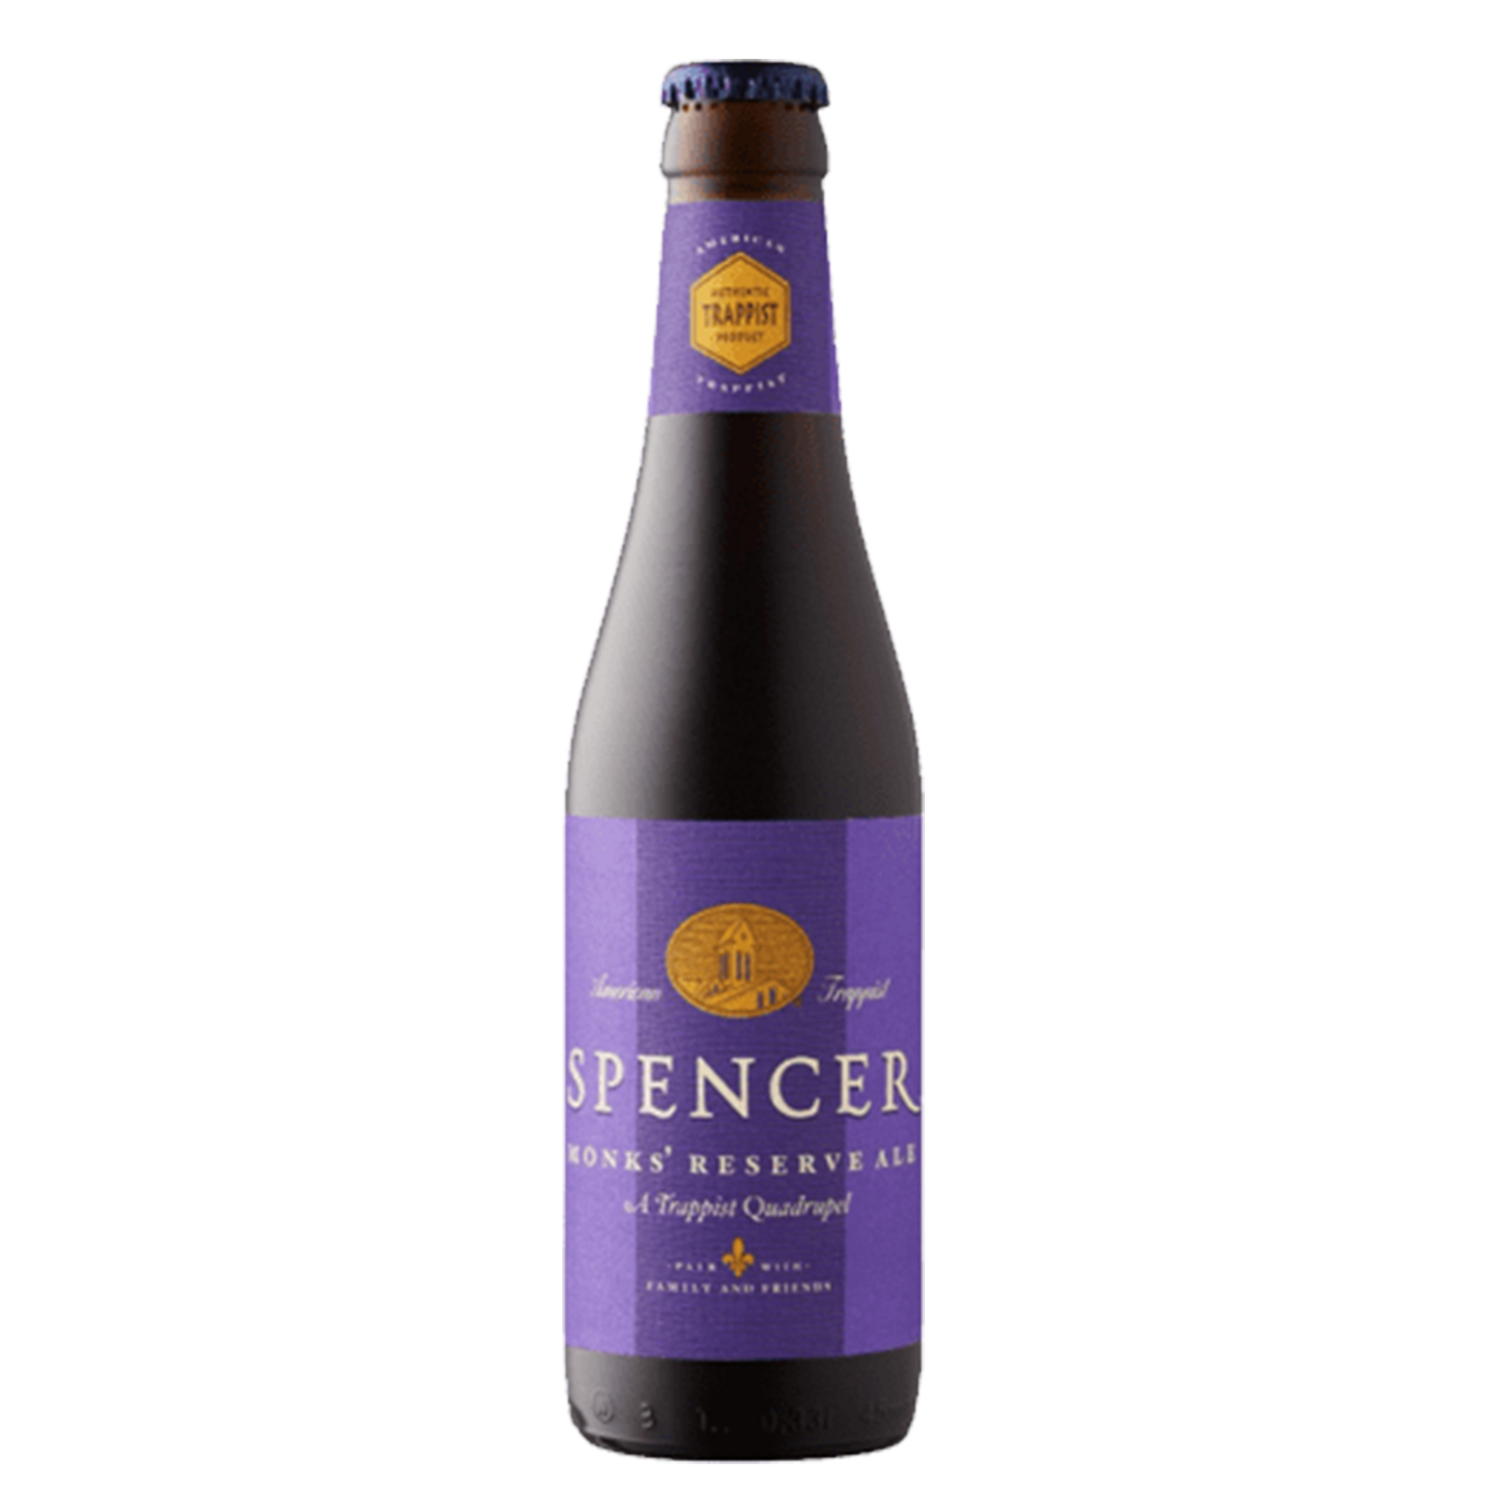 Spencer Monk's Reserve Ale Trappist Style Quad